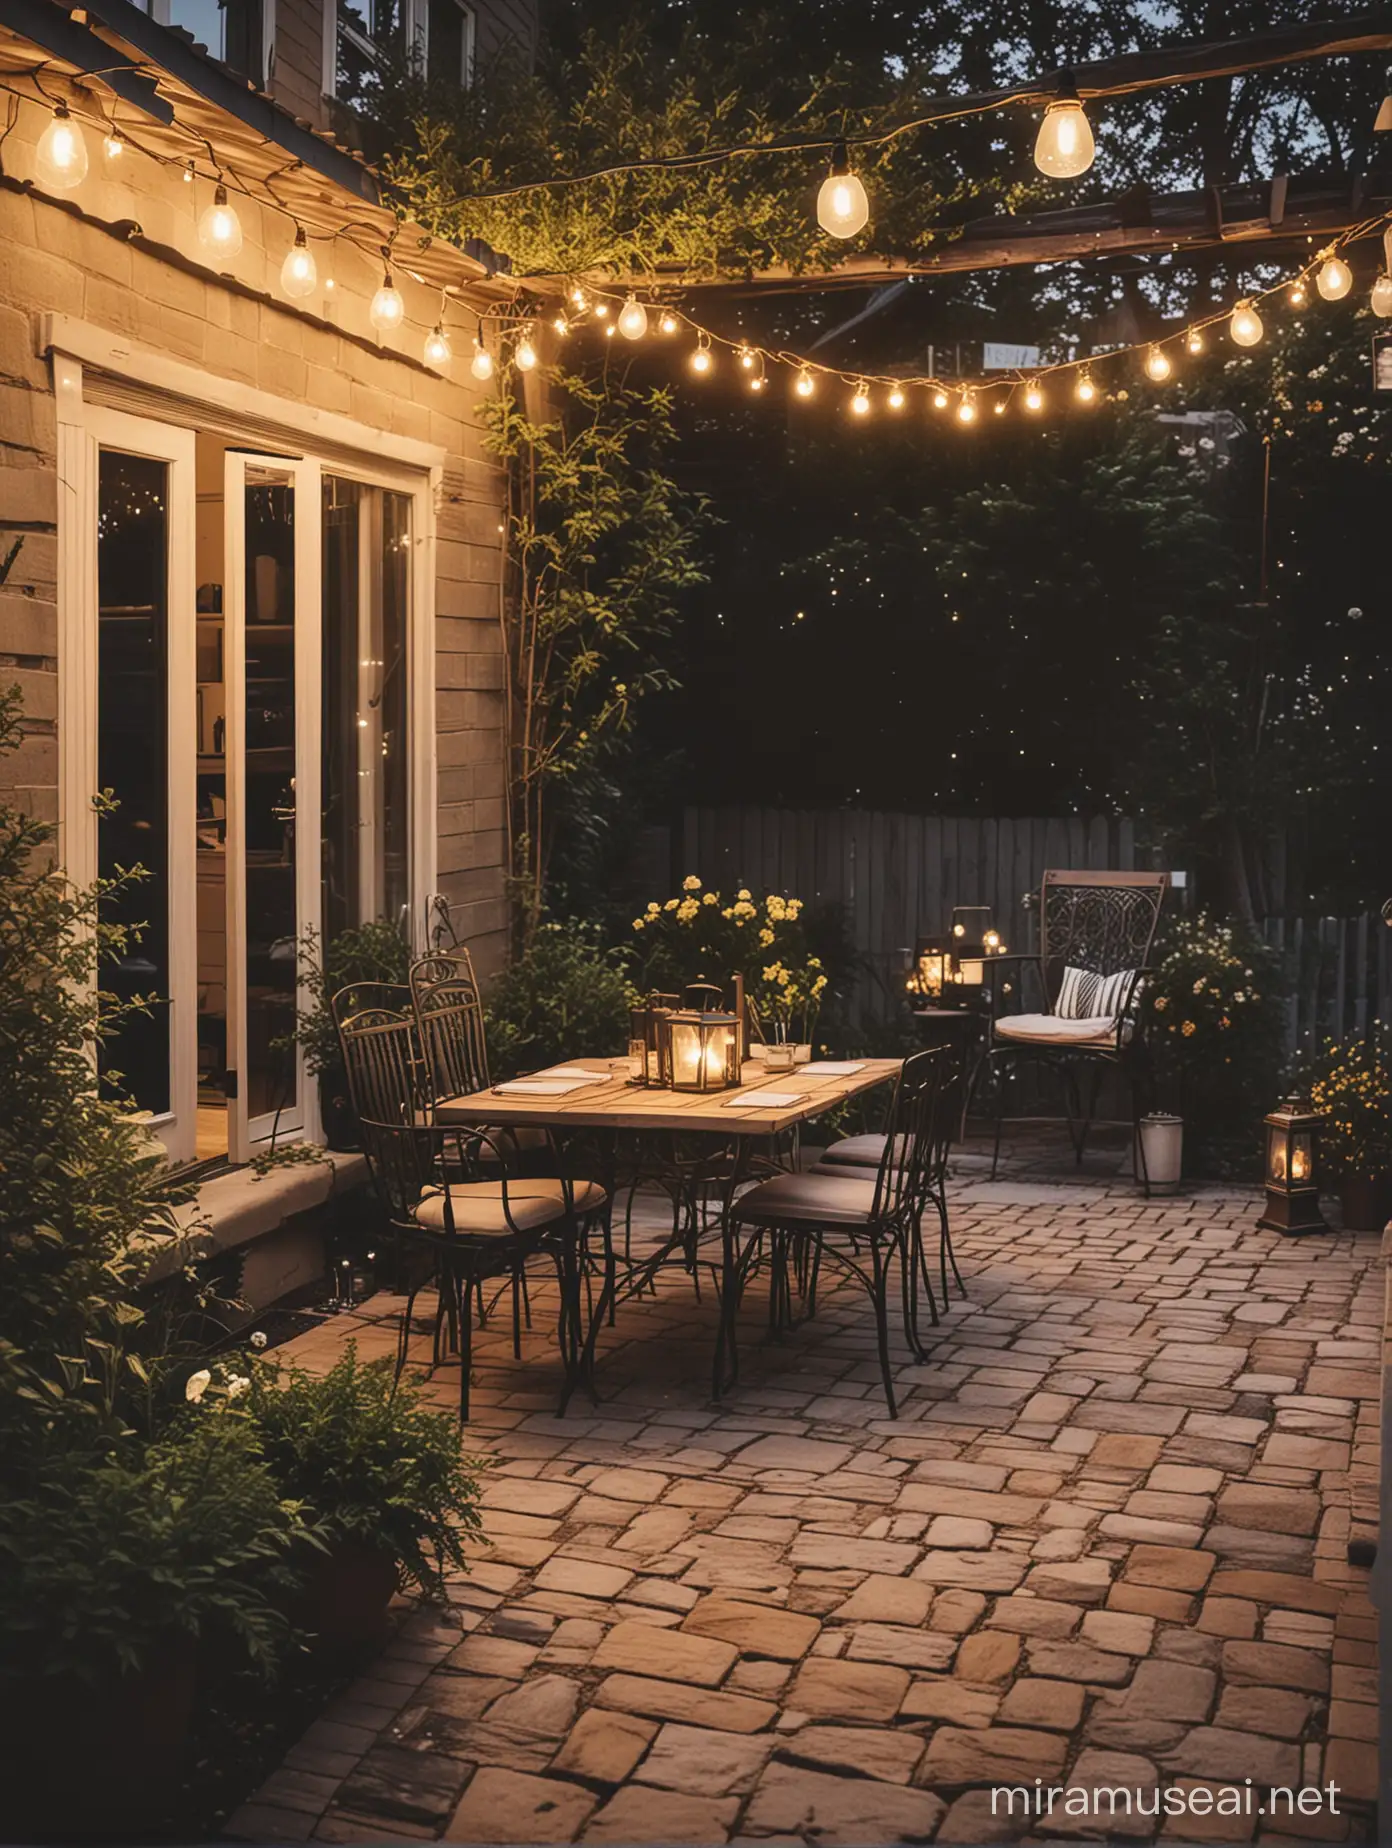 a picture taken on instagram of a patio with a table and chairs, outdoors lighting, cozy night fireflies, outdoor lighting, cozy lights, cinematic outdoor lighting, night outdoors, cozy atmosphere, soft outdoor light, cozy lighting, outdoors at night, outside lighting, soft filtered outdoor lighting, cosy atmosphere, outdoors setting, warm lantern lighting, cozy setting, string lightsHigh-quality, photographic images with ultra-high detail.